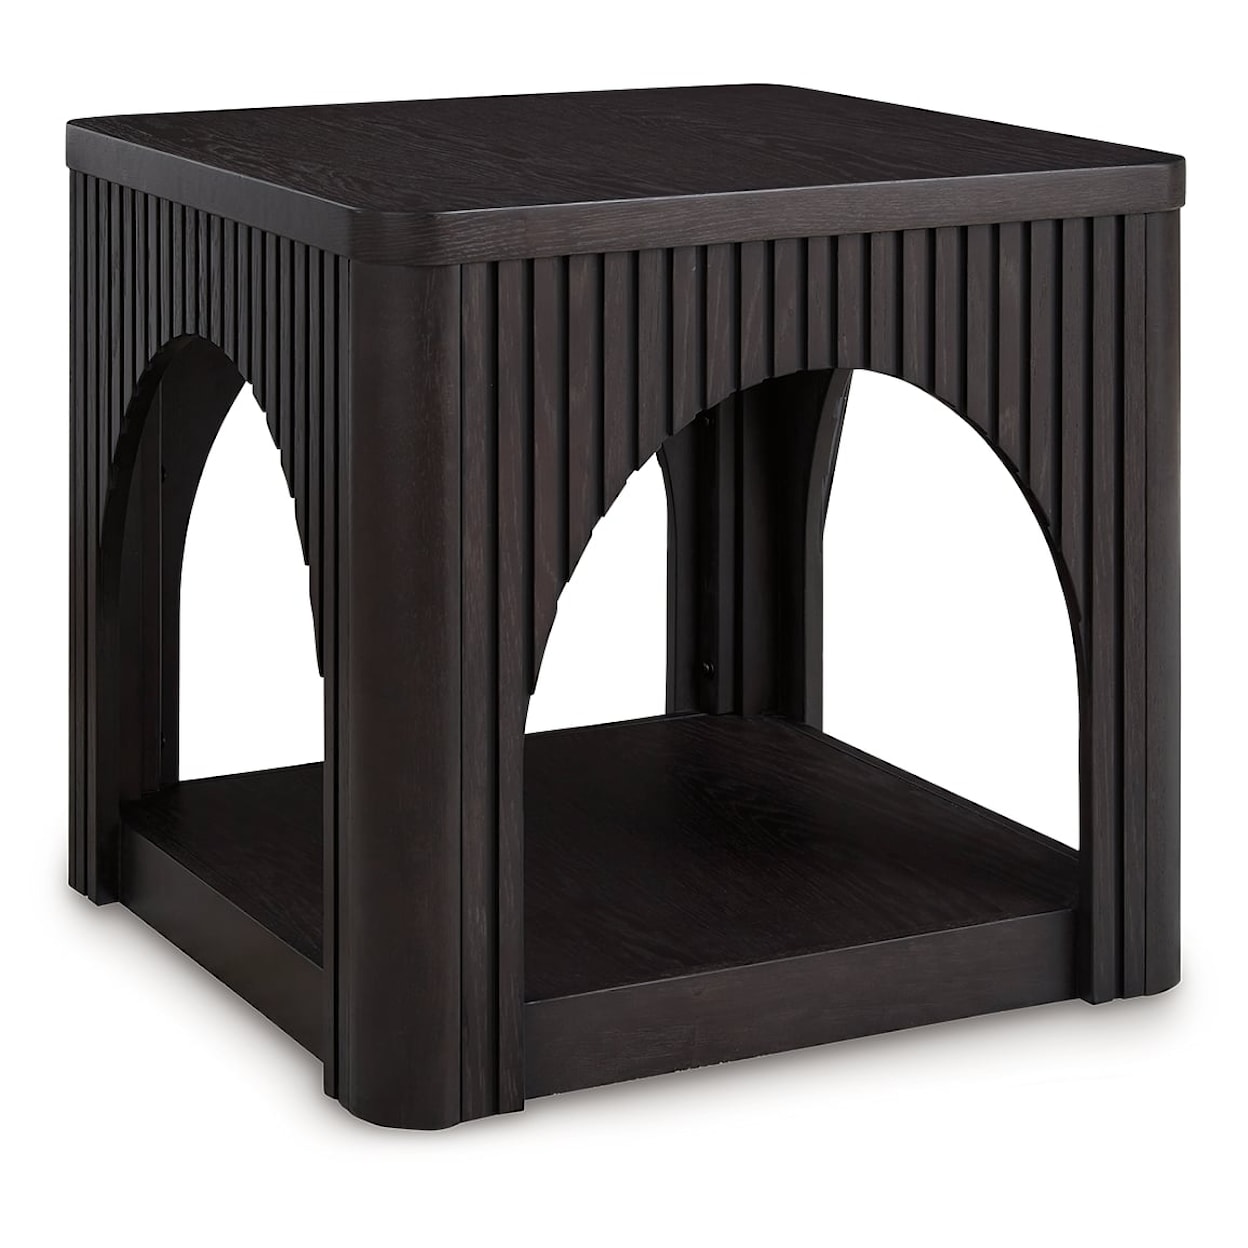 Michael Alan Select Yellink Square End Table